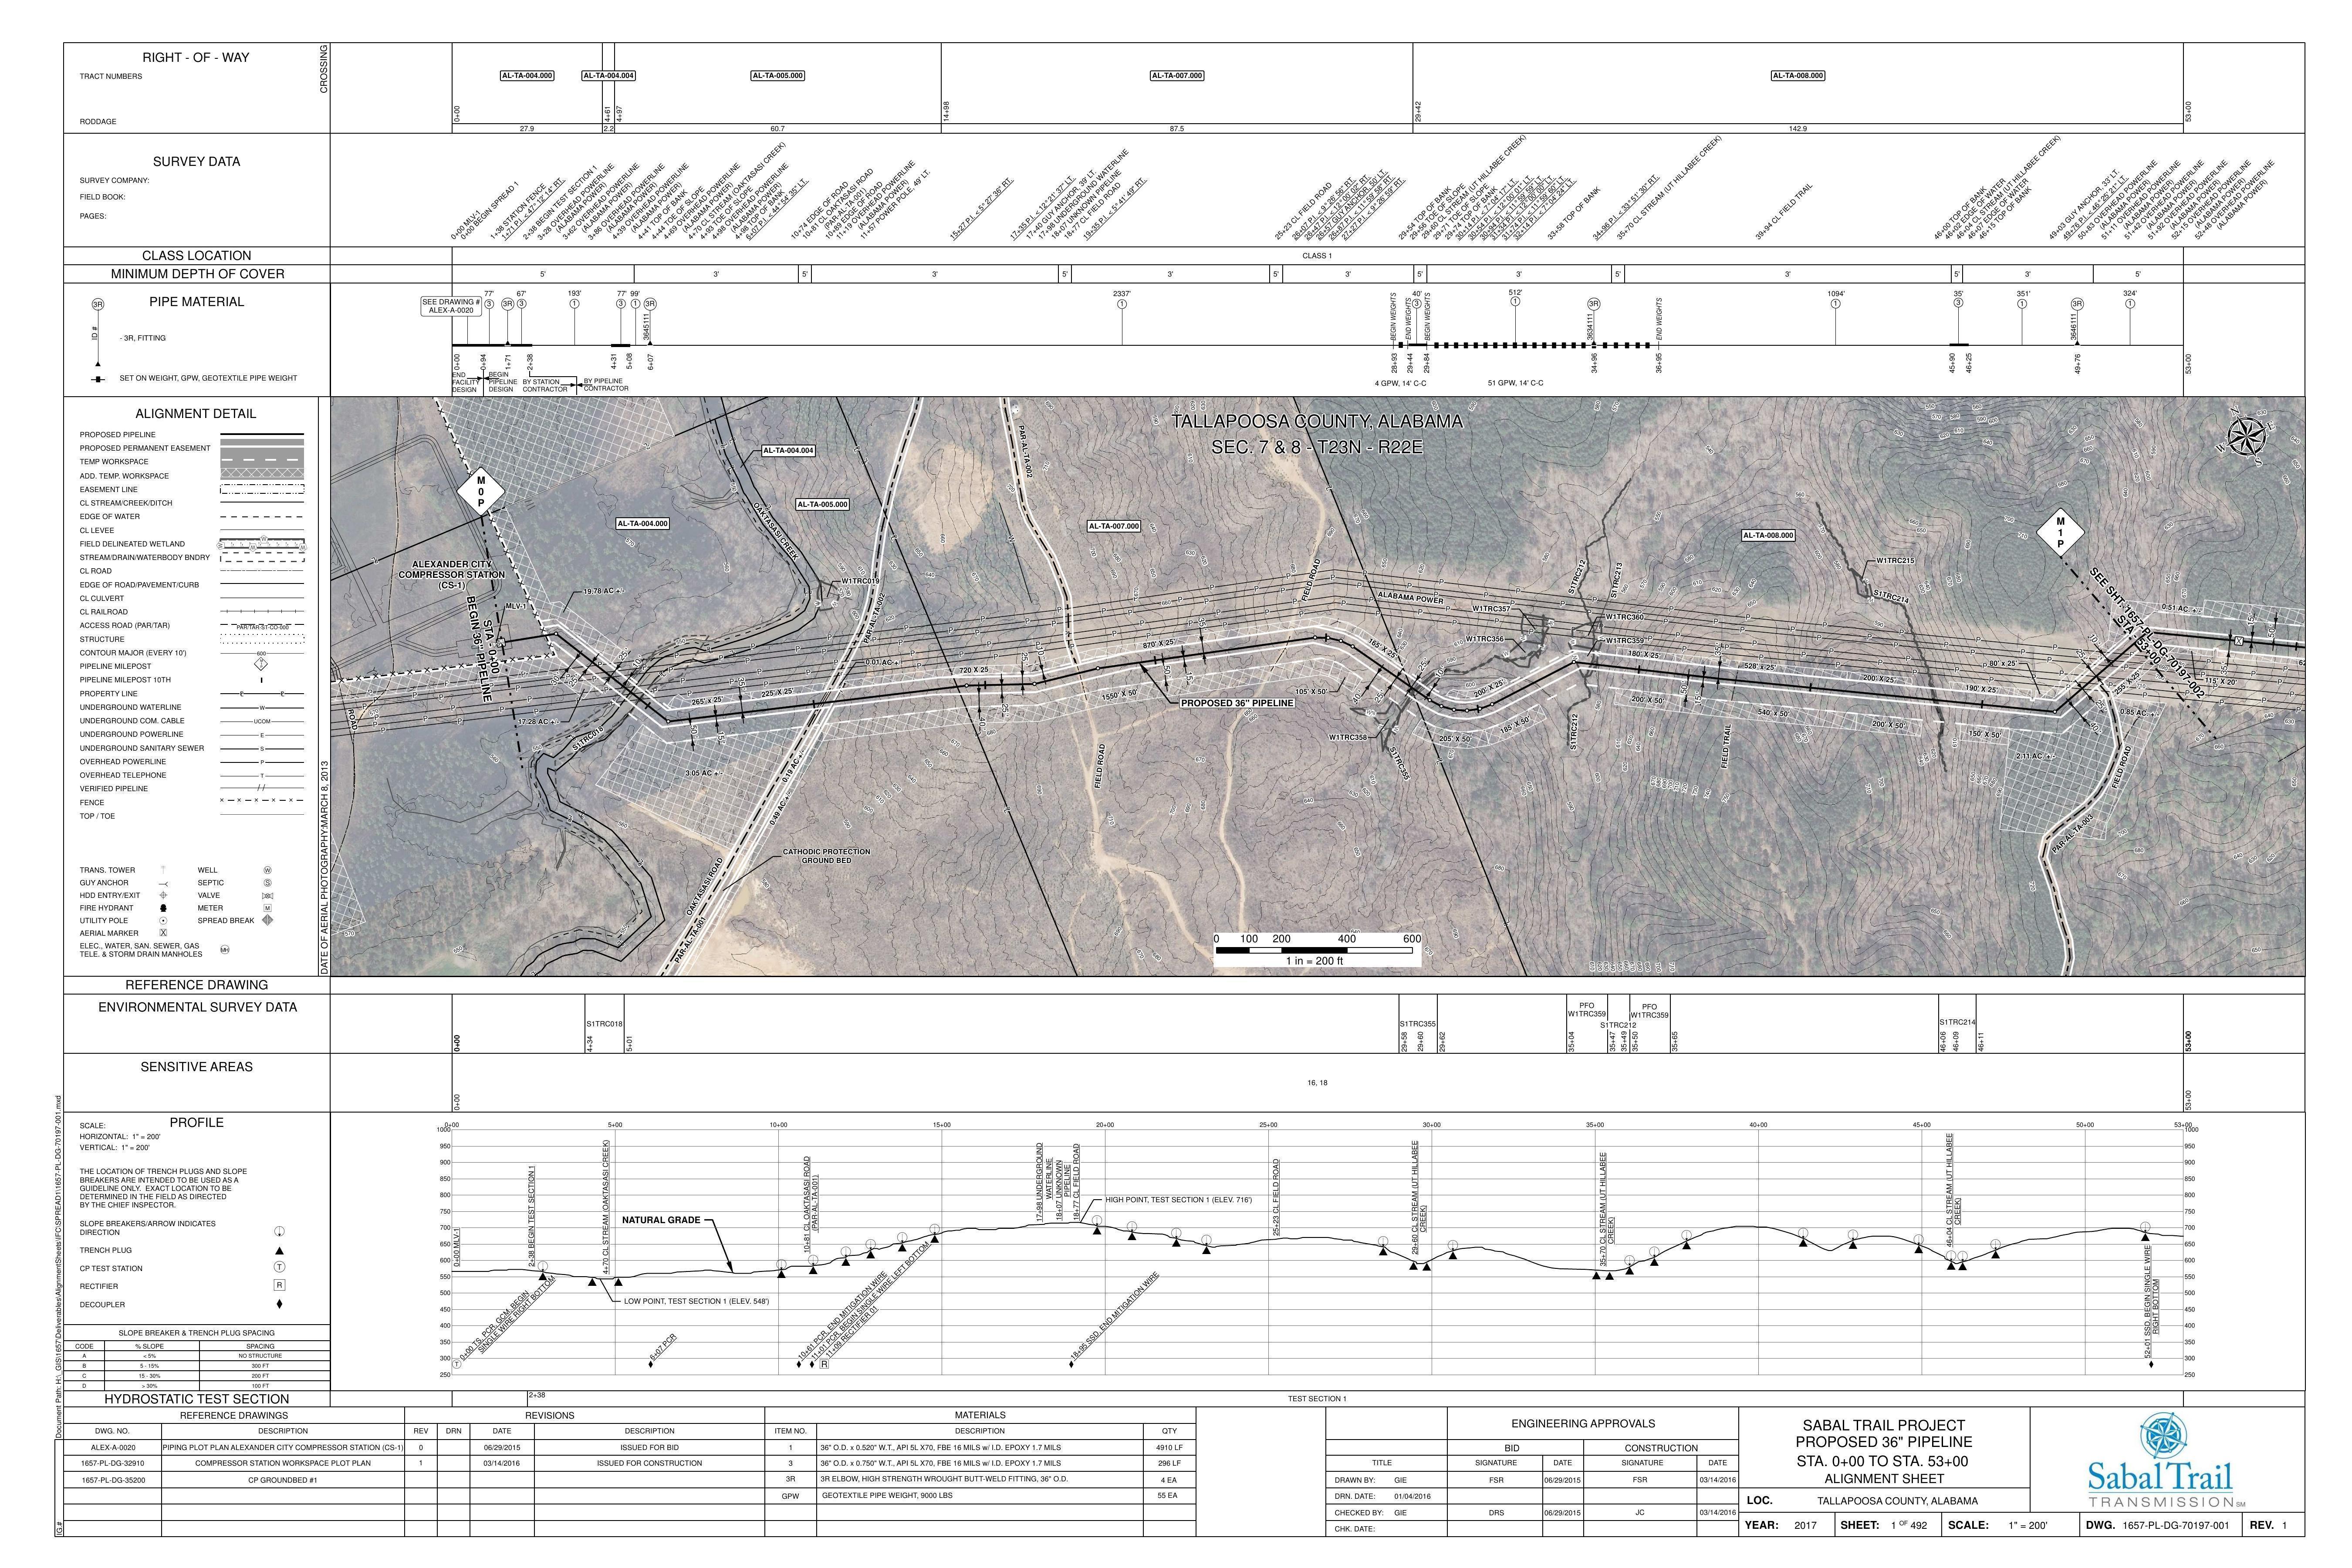 1657-PL-DG-70197-001, STA. 0+00 TO STA. 53+00, PIPELINE BY STATION, PIPING PLOT PLAN ALEXANDER CITY COMPRESSOR STATION (CS-1), COMPRESSOR STATION WORKSPACE PLOT PLAN, 10+81 CL OAKTASASI ROAD, 4+70 CL STREAM (OAKTASASI CREEK), COMPRESSOR STATION, TALLAPOOSA COUNTY, ALABAMA